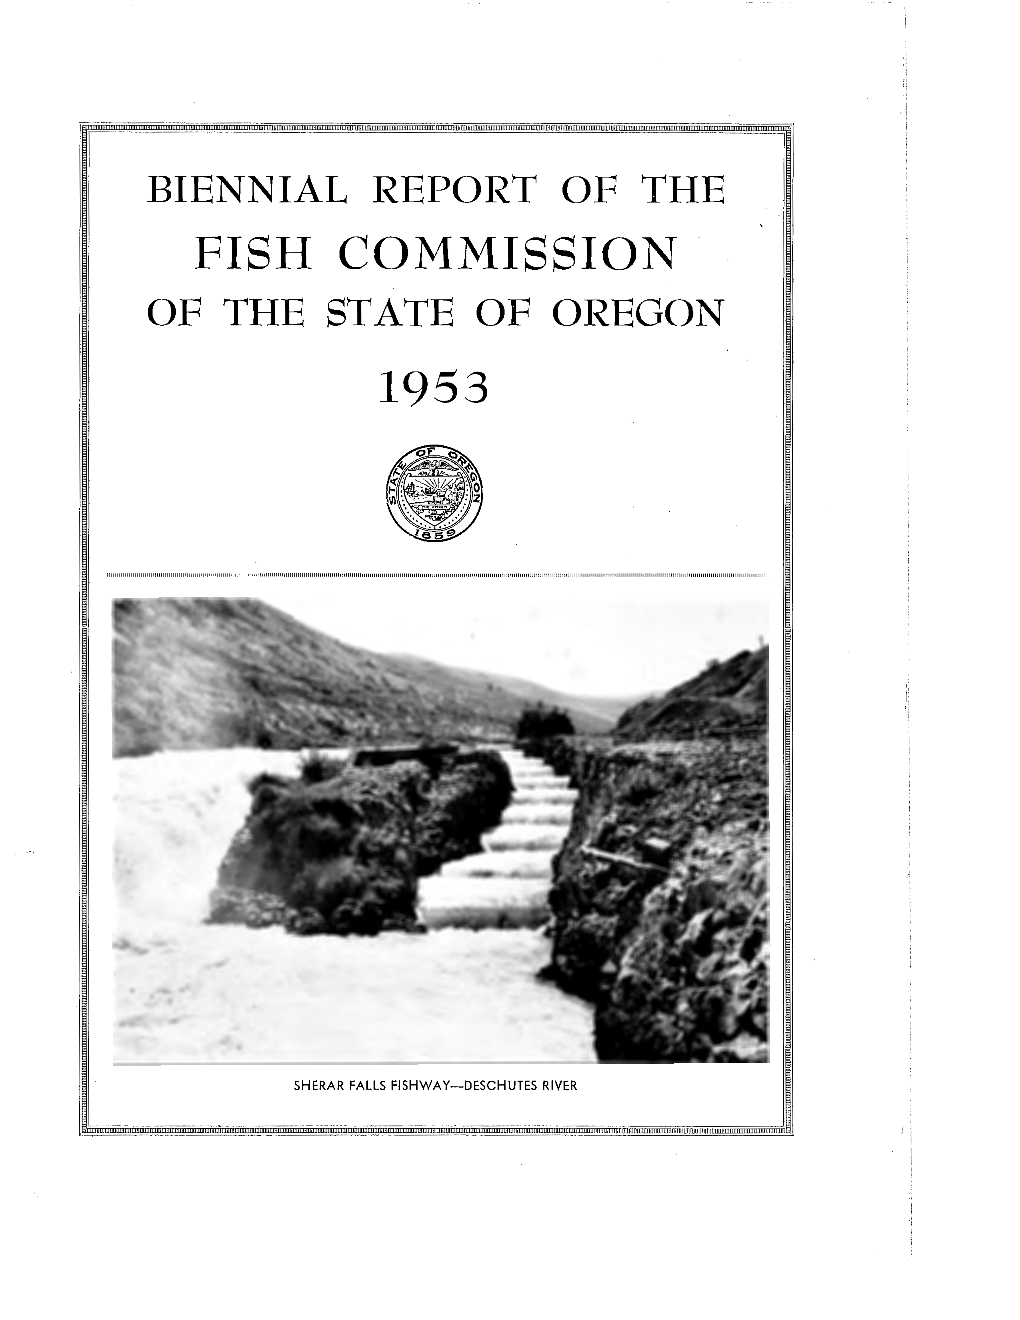 Fish Commission of the State of Oregon 1953